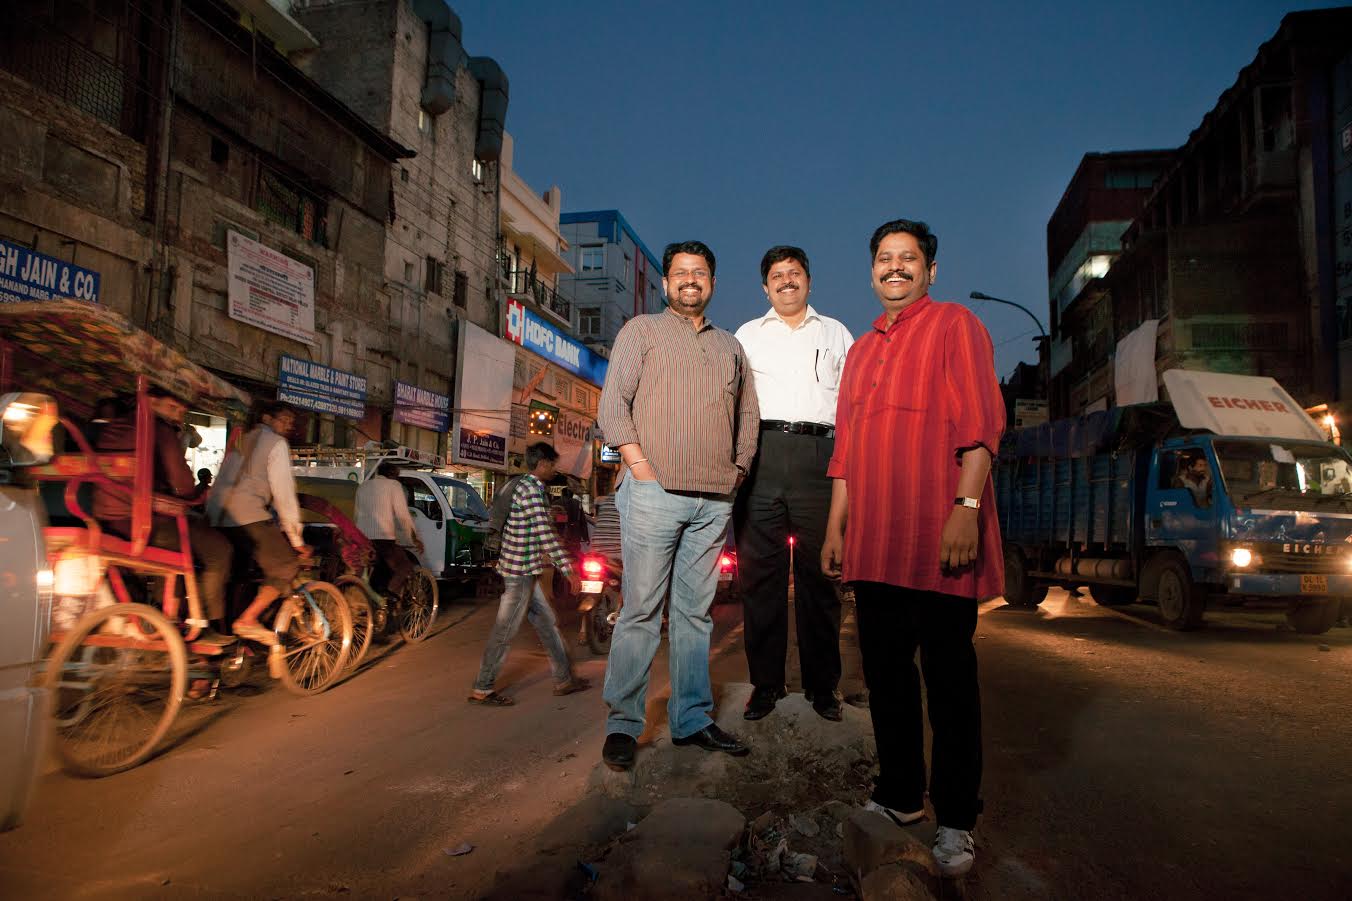 On Womens Day, Heres The Story Of 3 Men Who Are Rescuing Trafficking Victims & Rehabilitating Them